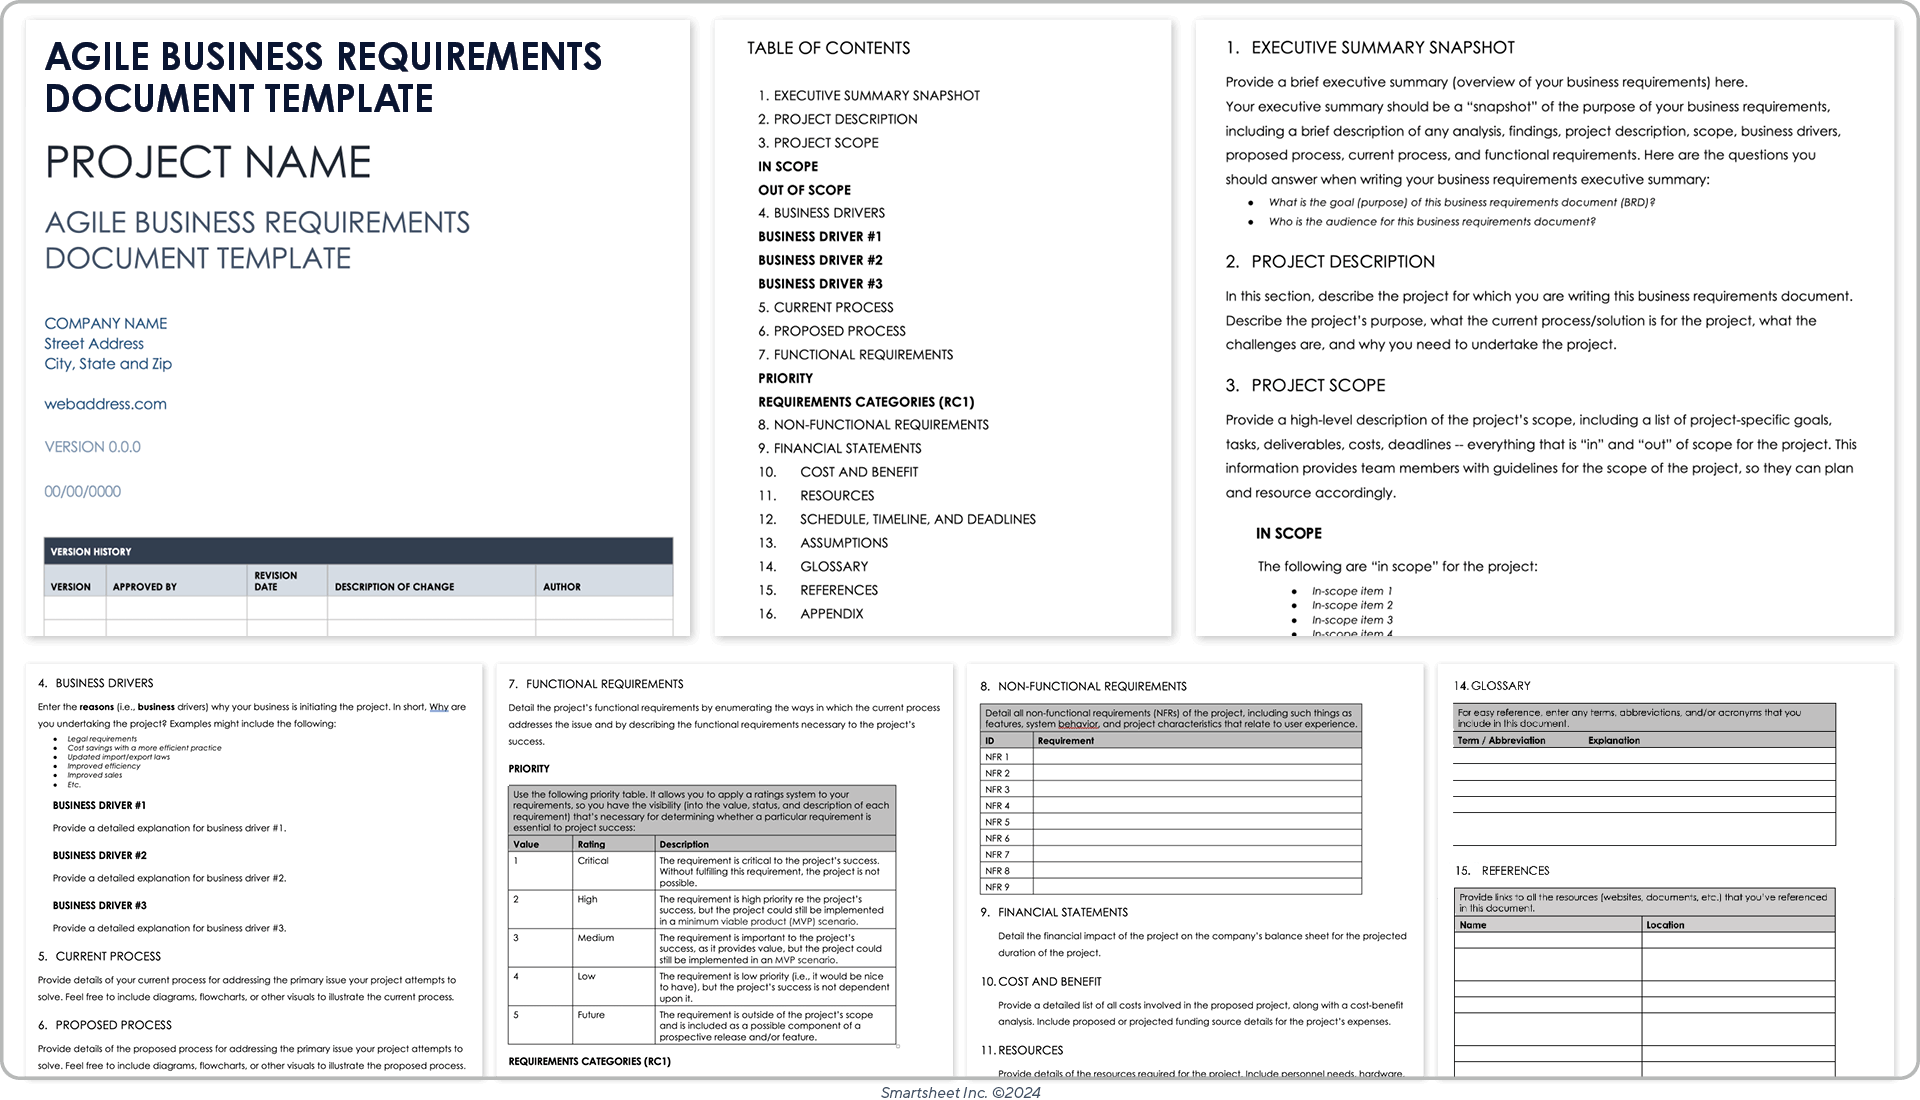 Agile business requirements document template